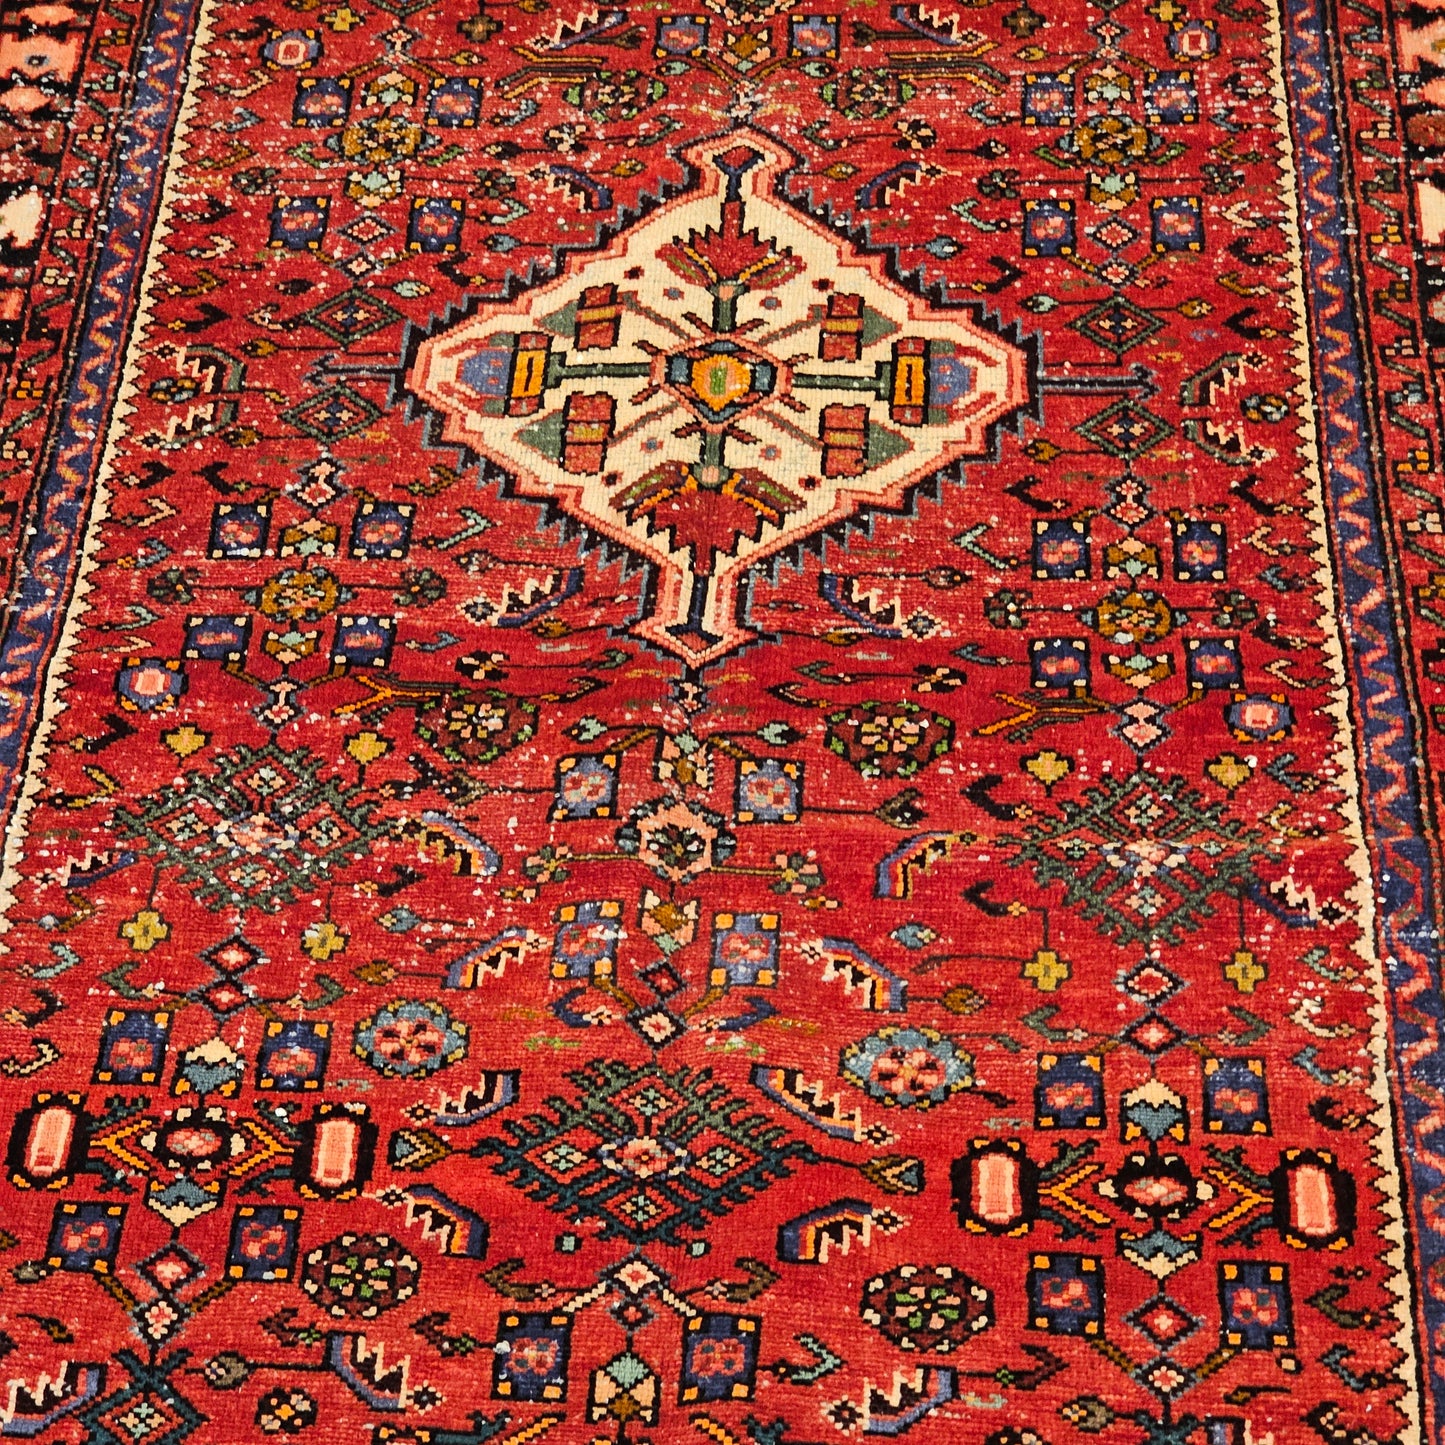 100% Wool Antique Hand Knotted Red Rug / Carpet ~ 4' 6" x 9' 8"